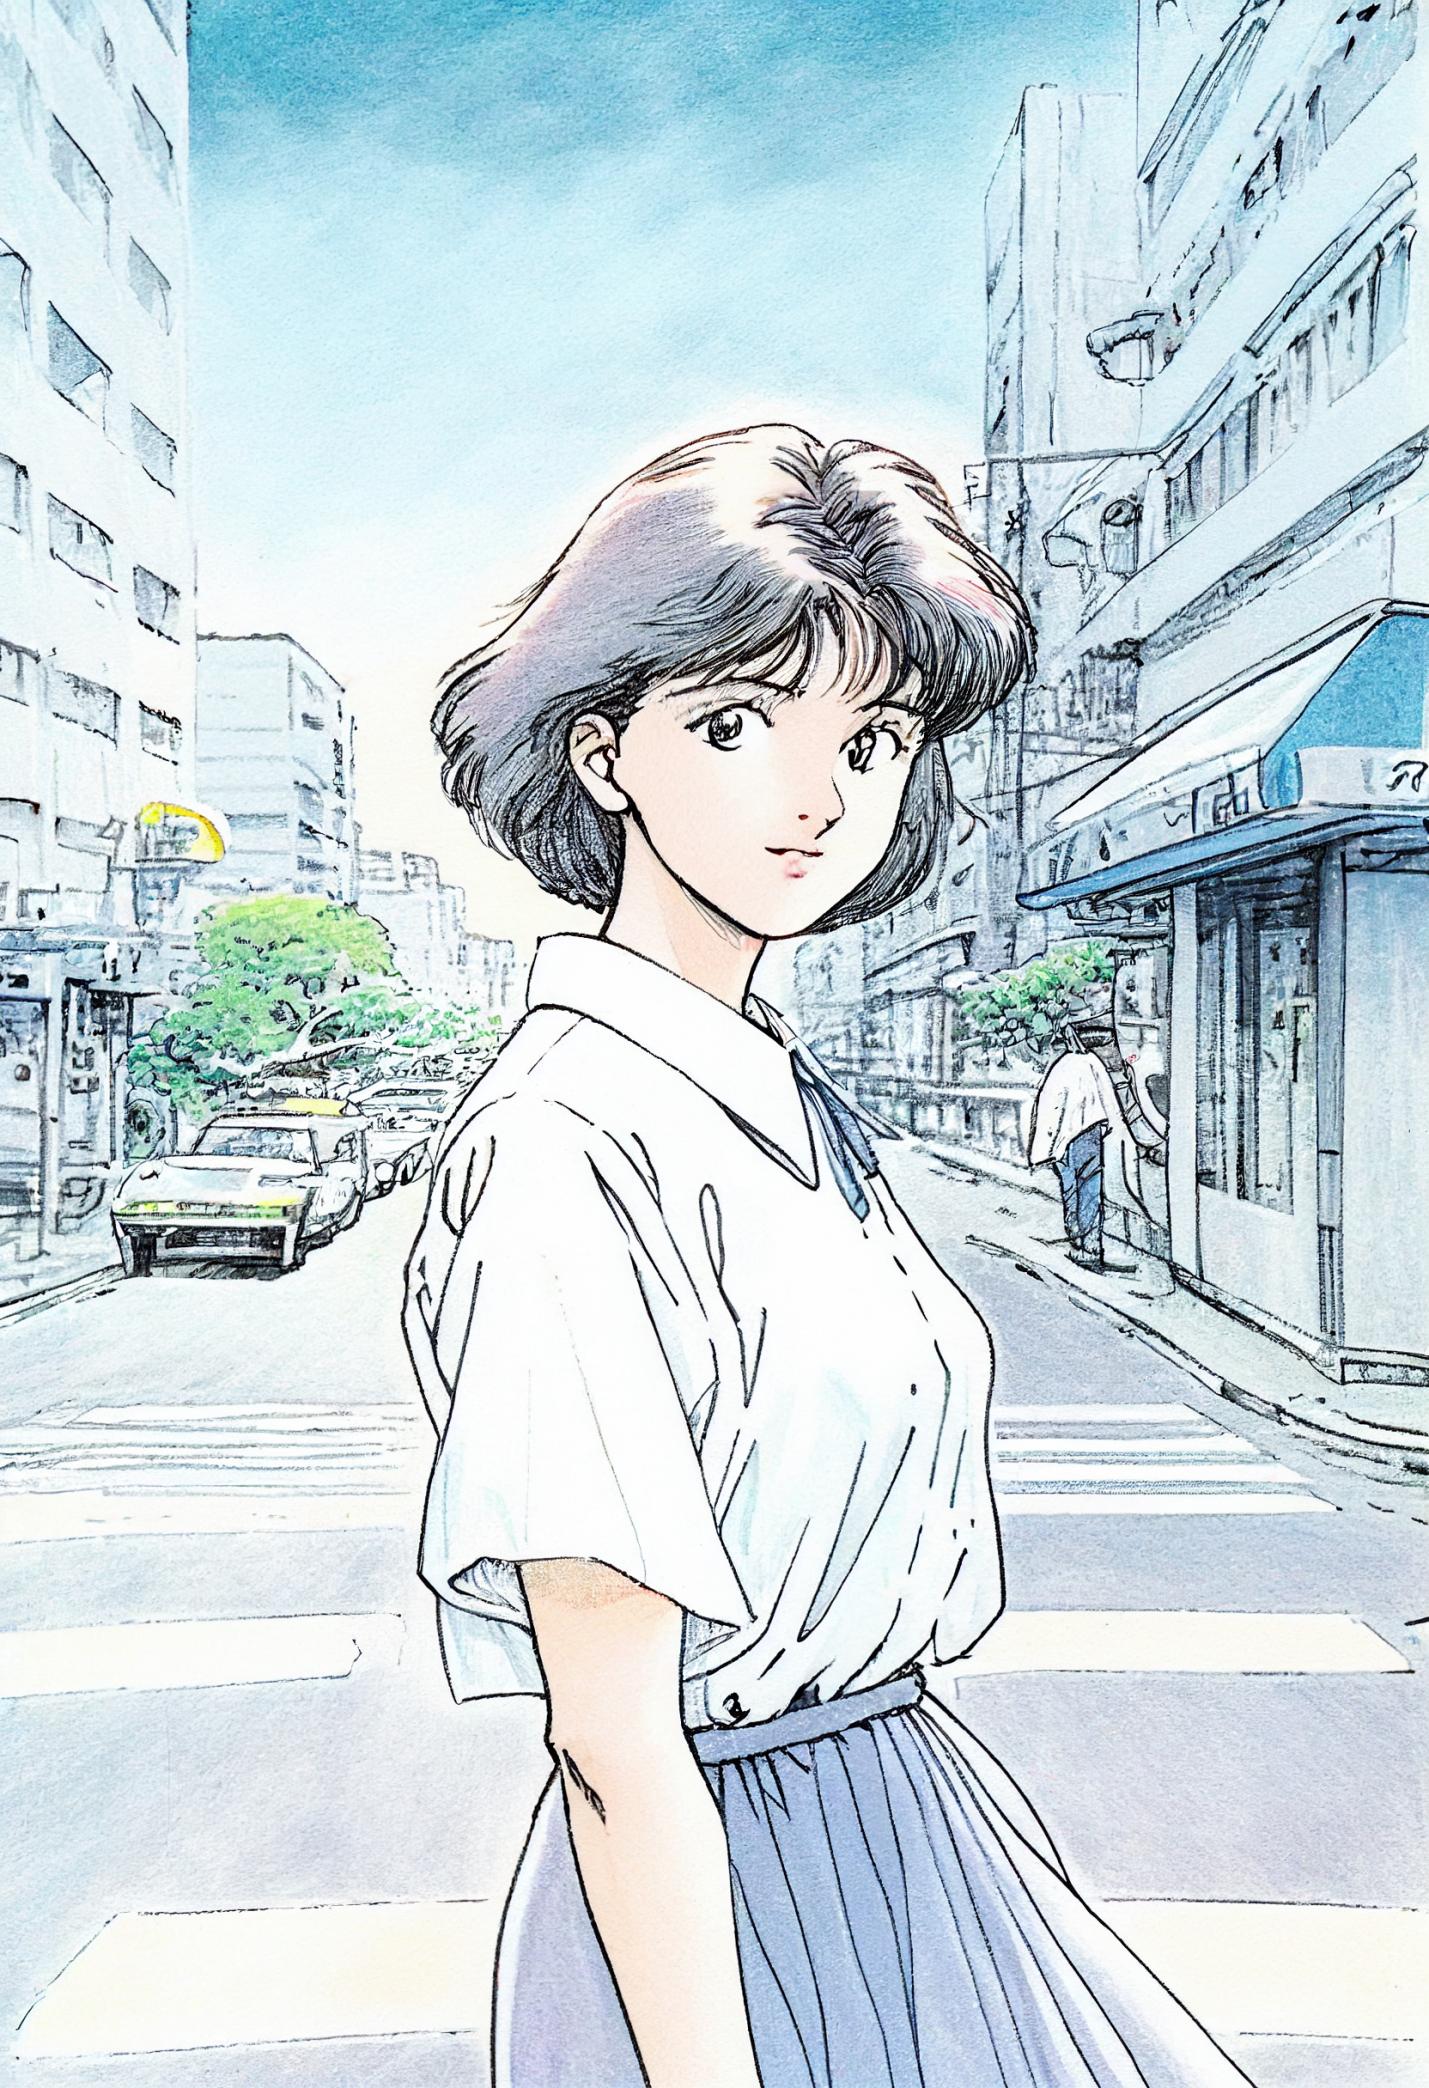 Bluewing_Beautiful_woman_by_Moto_Hagio_street_background_perspe_971b07a8-94d2-4a00-8697-90e5088bef56.png